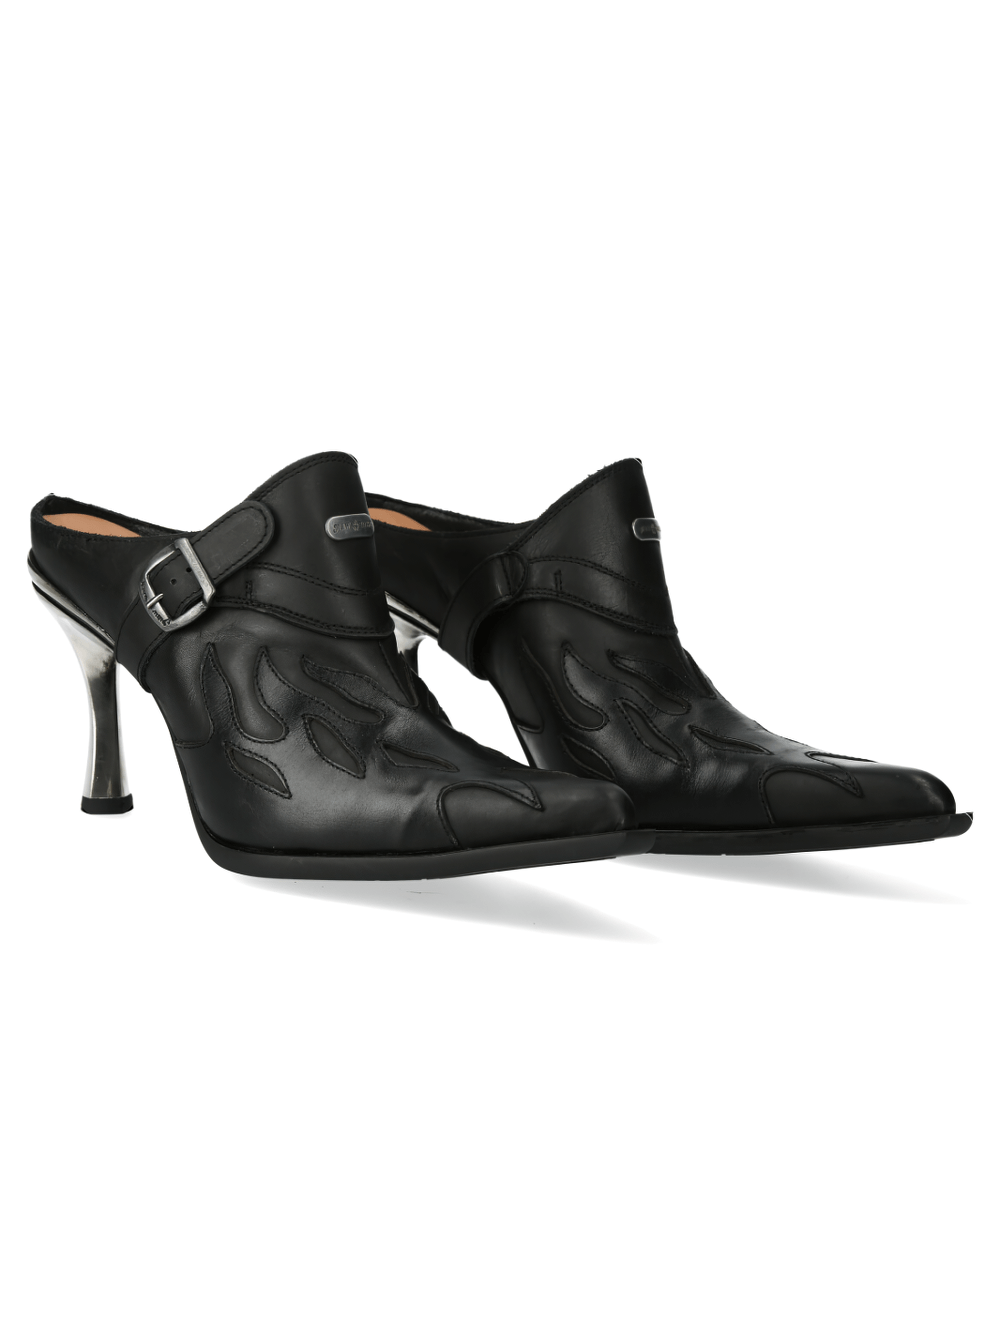 NEW ROCK Flame-Inspired Black Leather Buckle Shoes